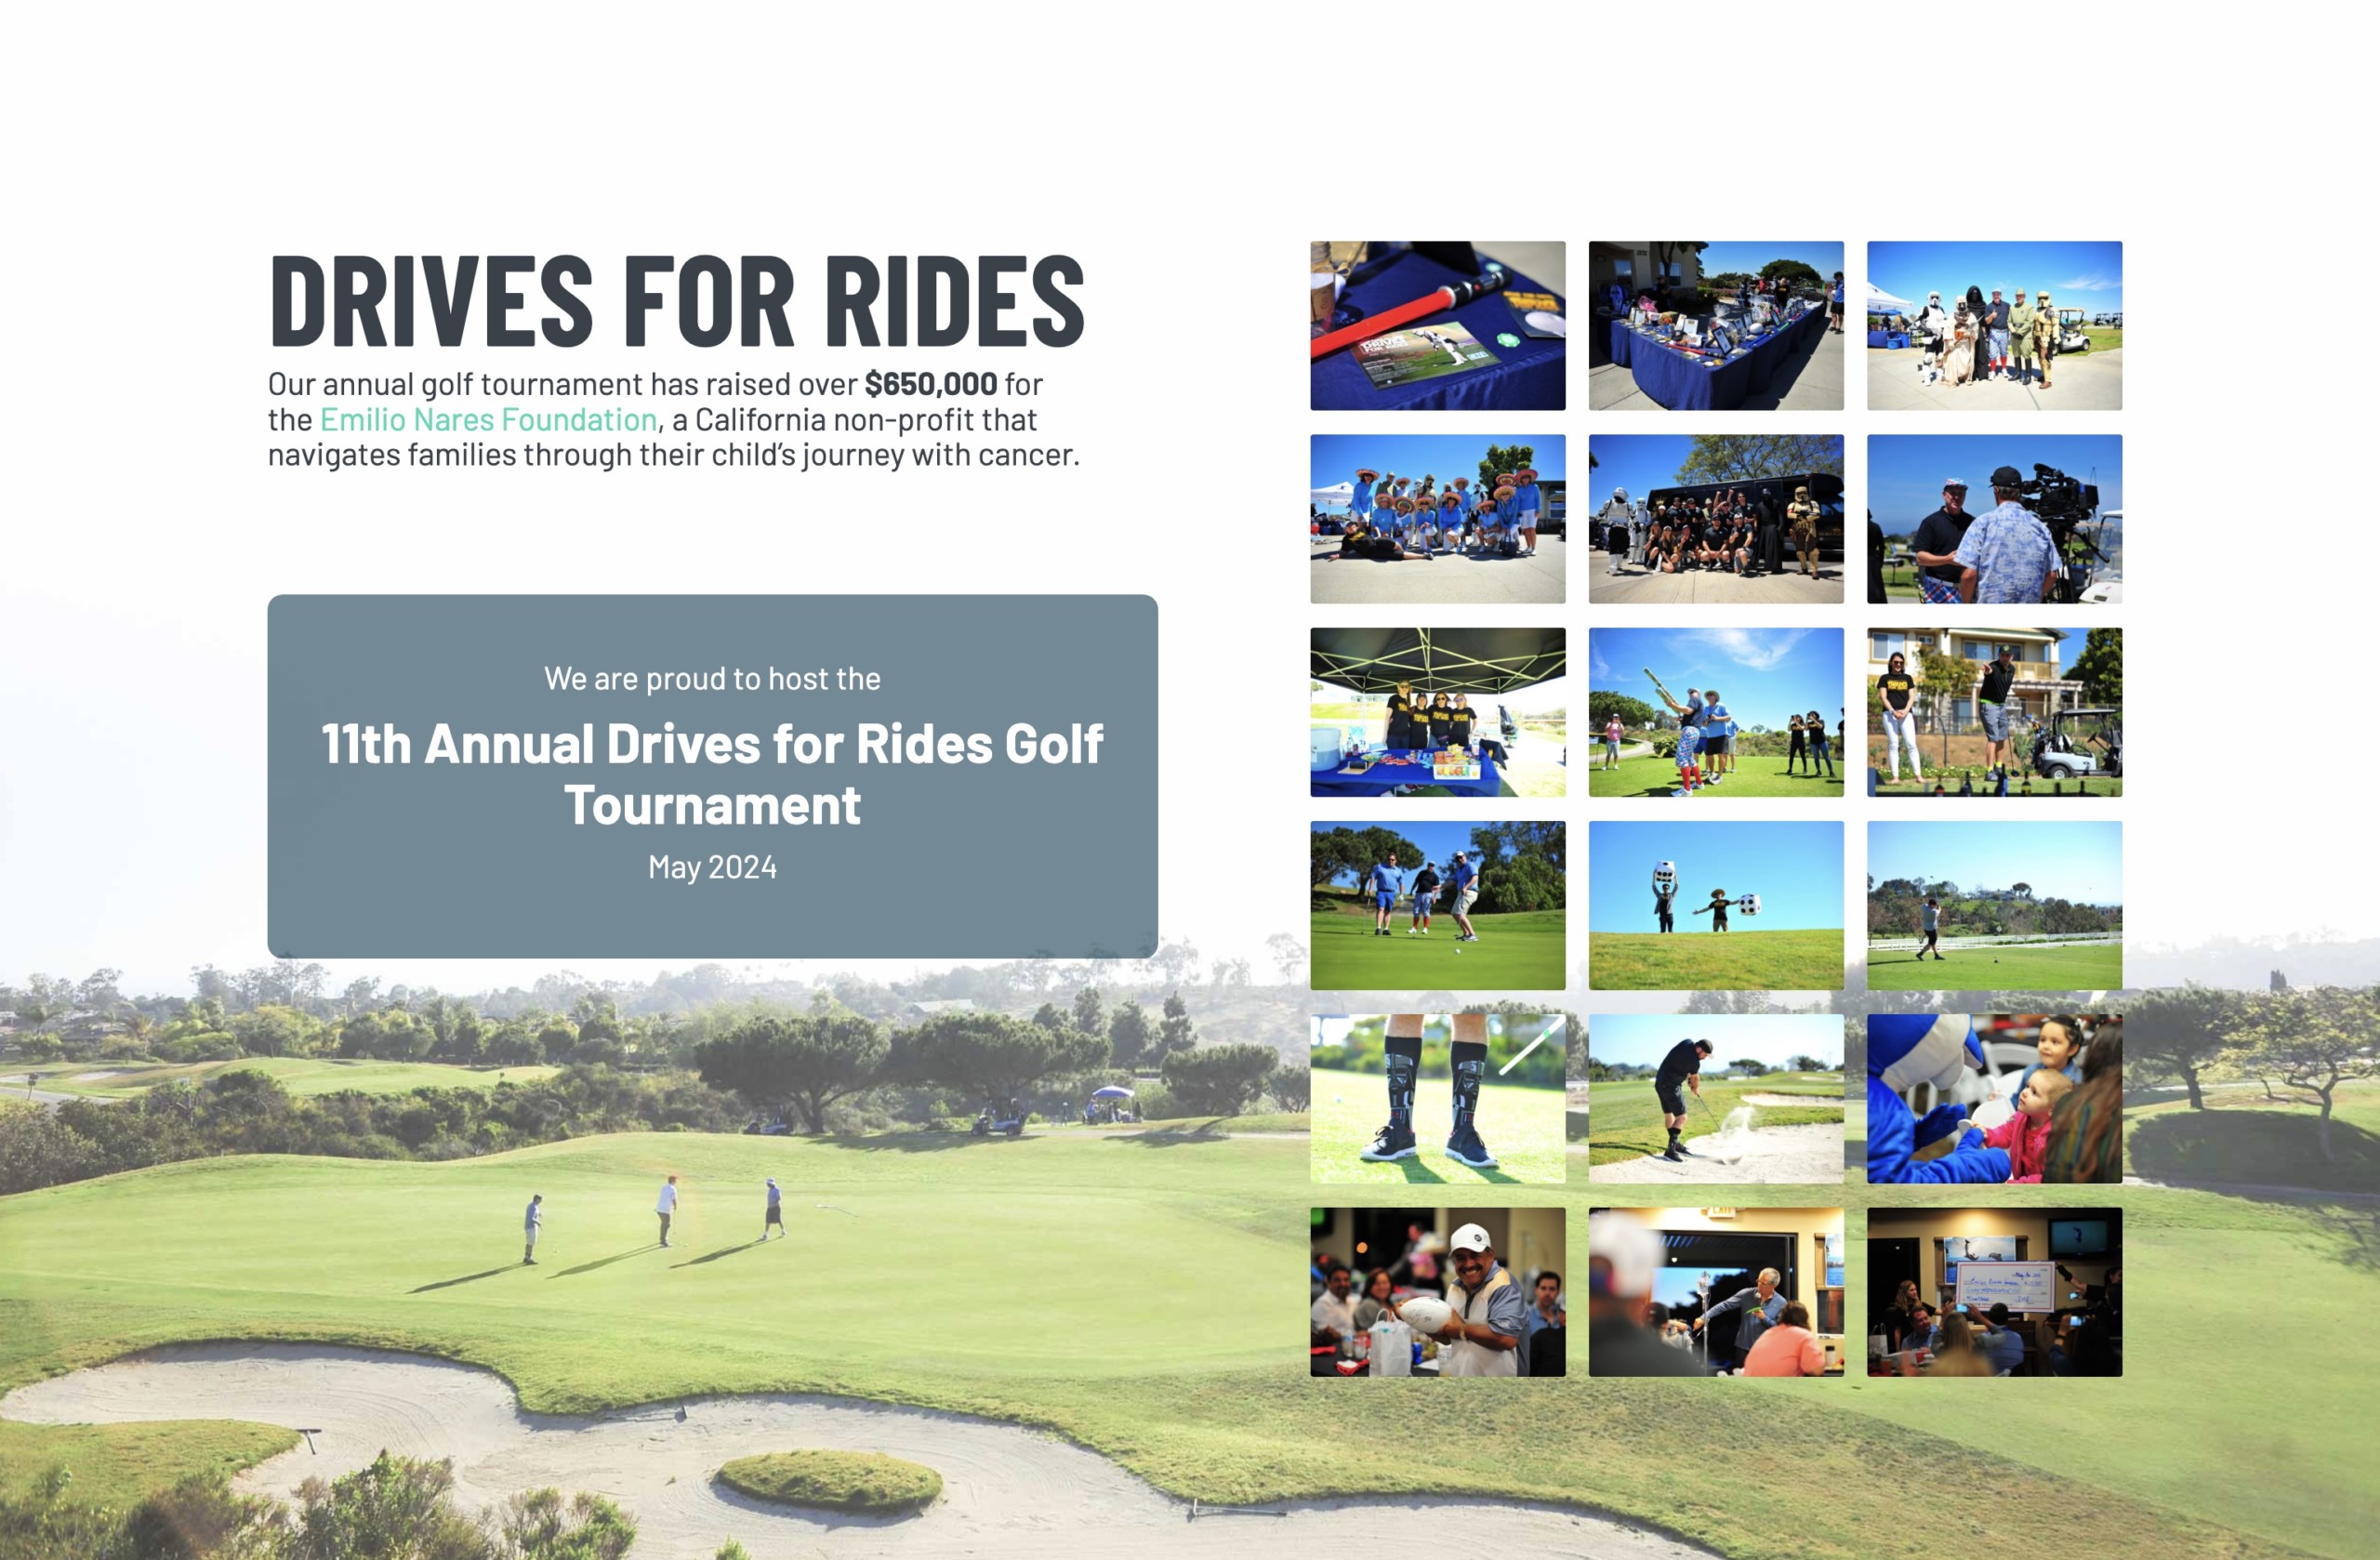 Gap Intelligence Drives for Rides Annual Fundraiser